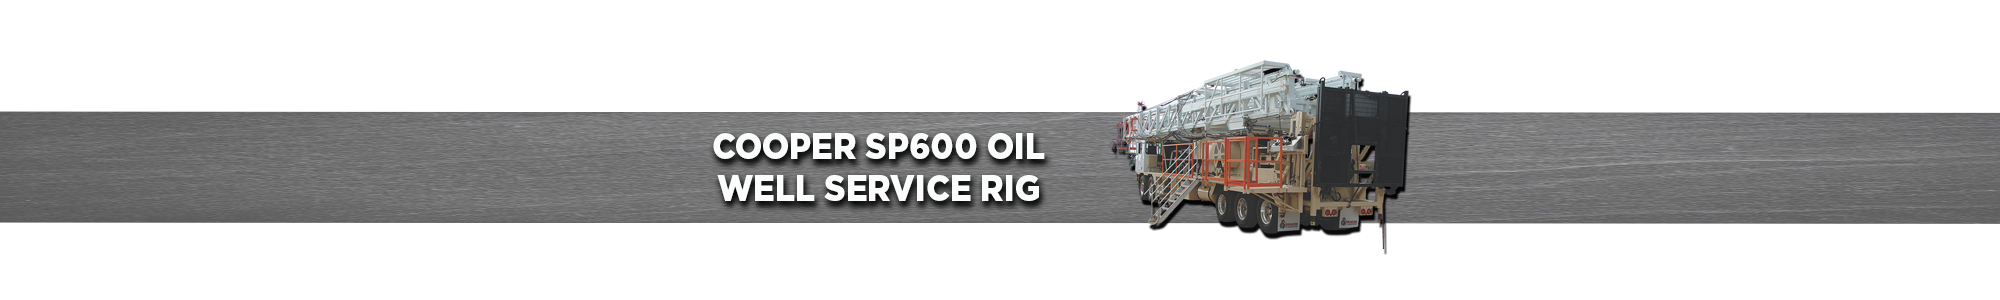 Cooper SP600 Oil Well Service Rig